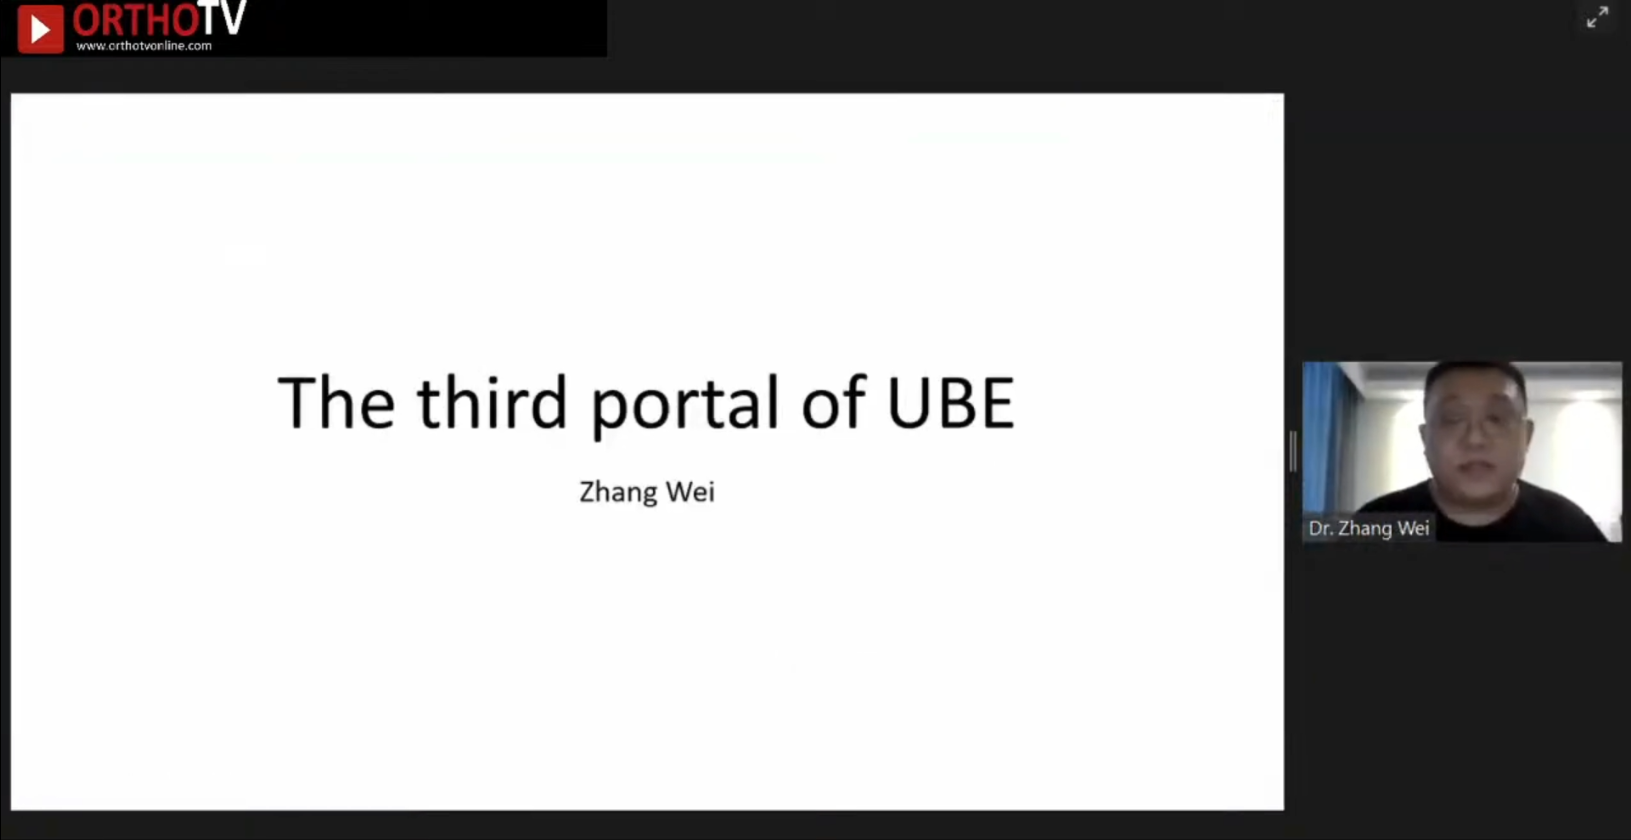 The Third Portal of UBE - Dr Zhang Wei